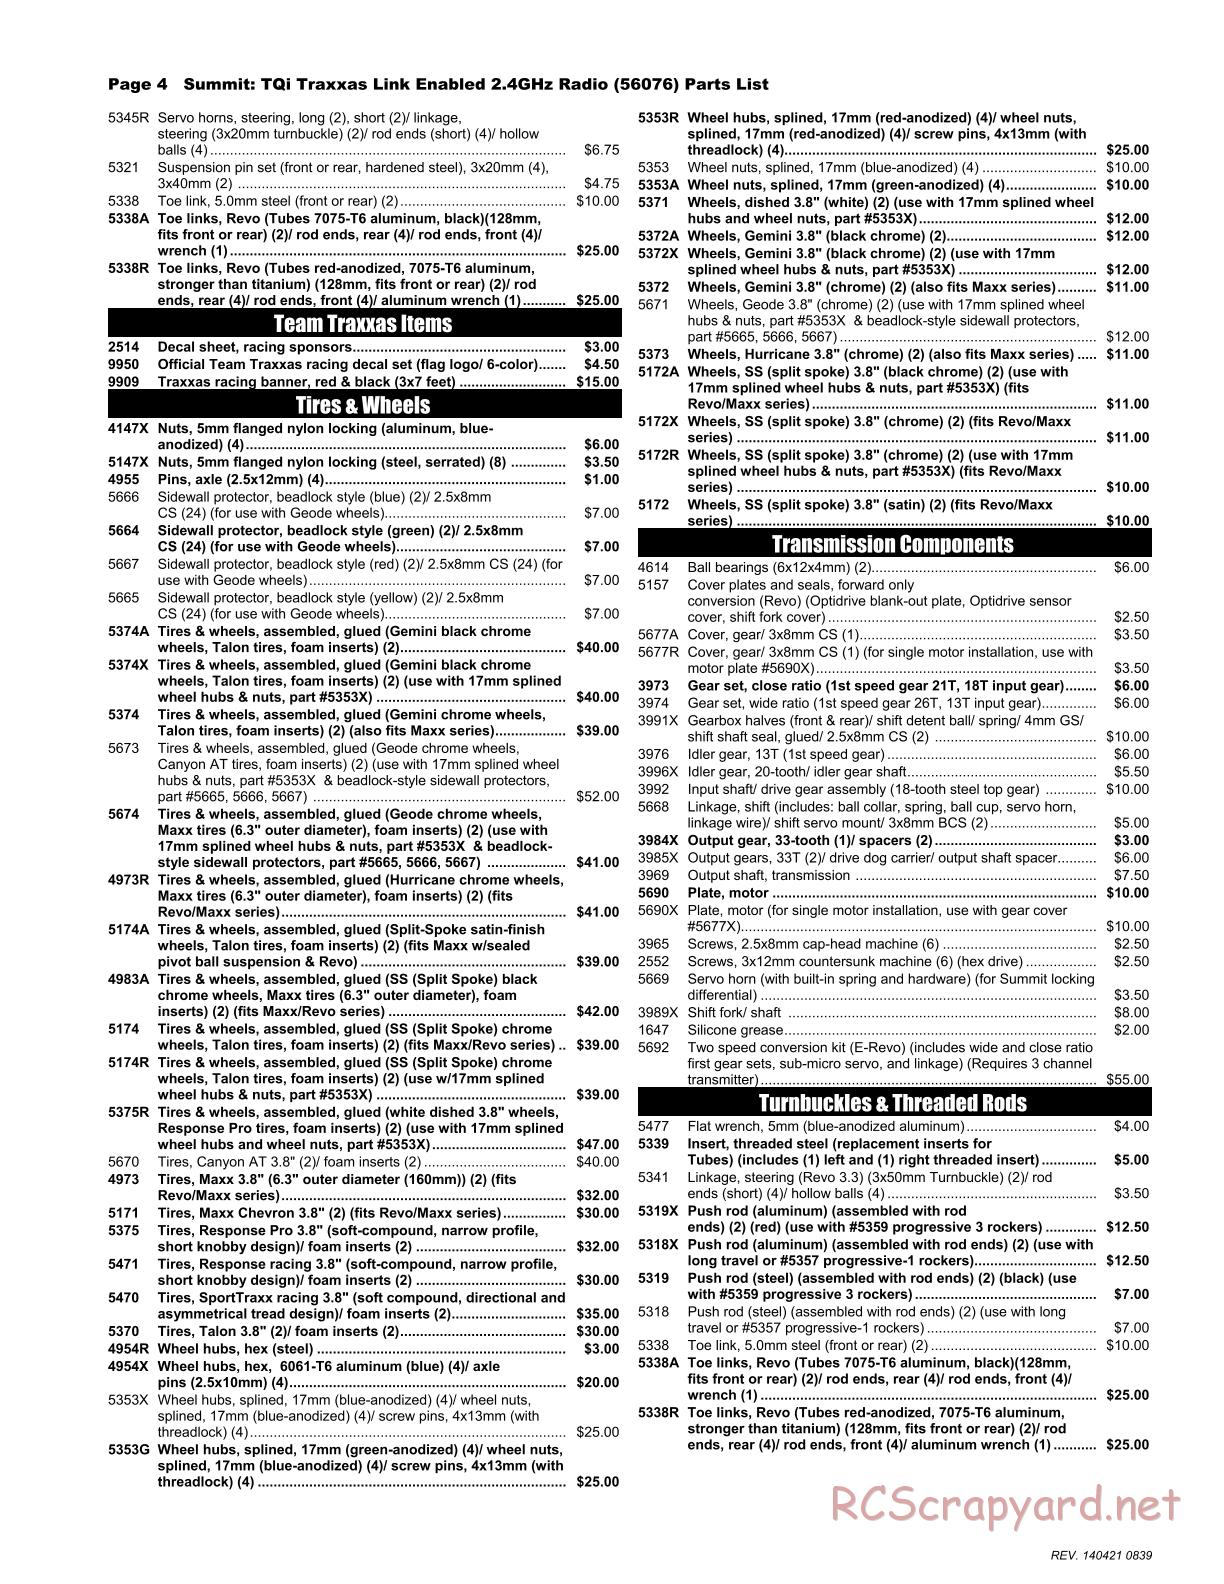 Traxxas - Summit (2014) - Parts List - Page 4